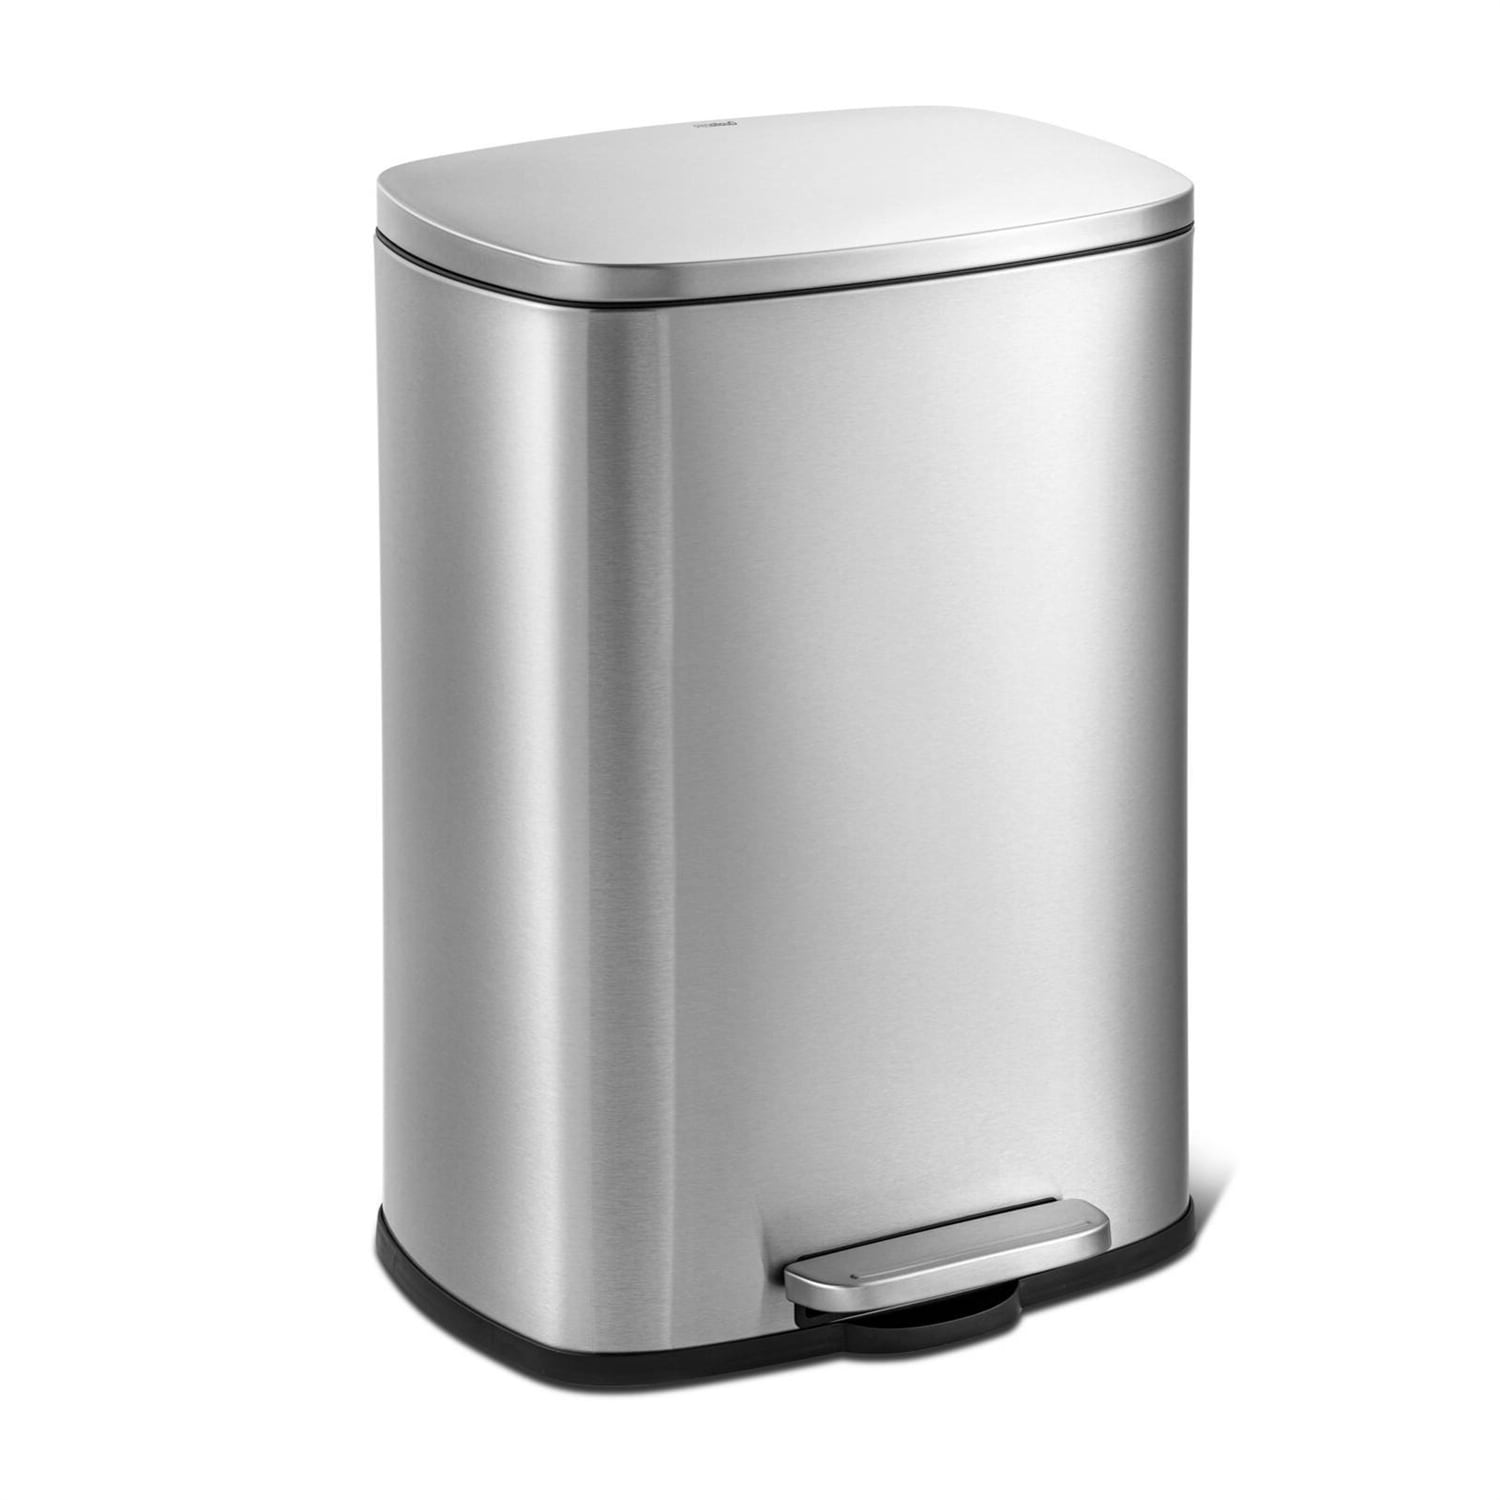  13 Gallon Trash Can, Brushed Stainless Steel Kitchen